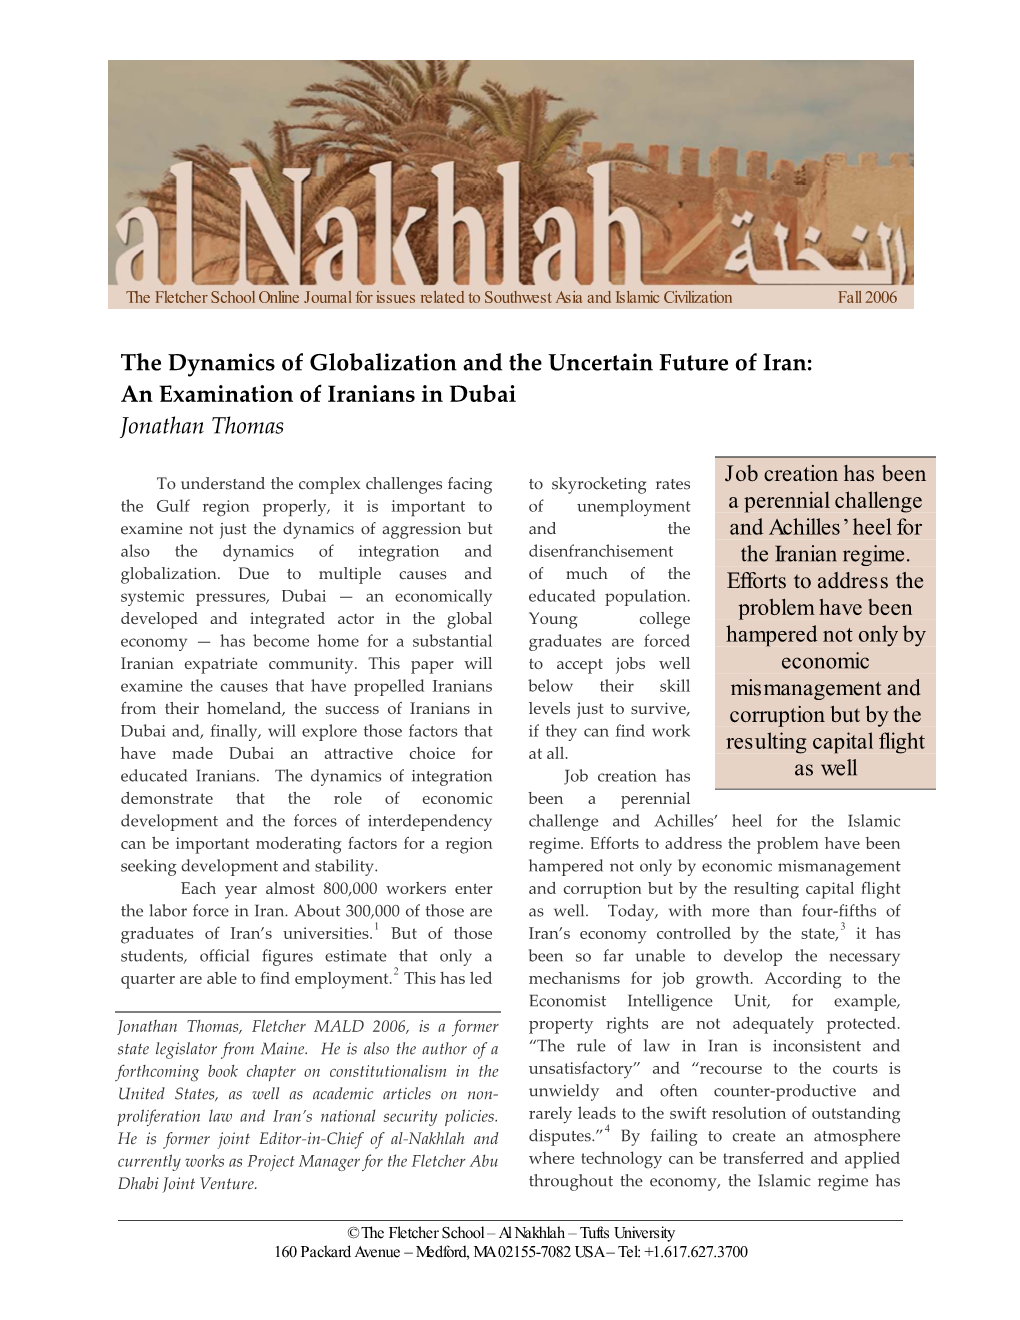 The Dynamics of Globalization and the Uncertain Future of Iran: an Examination of Iranians in Dubai -- Al Nakhlah